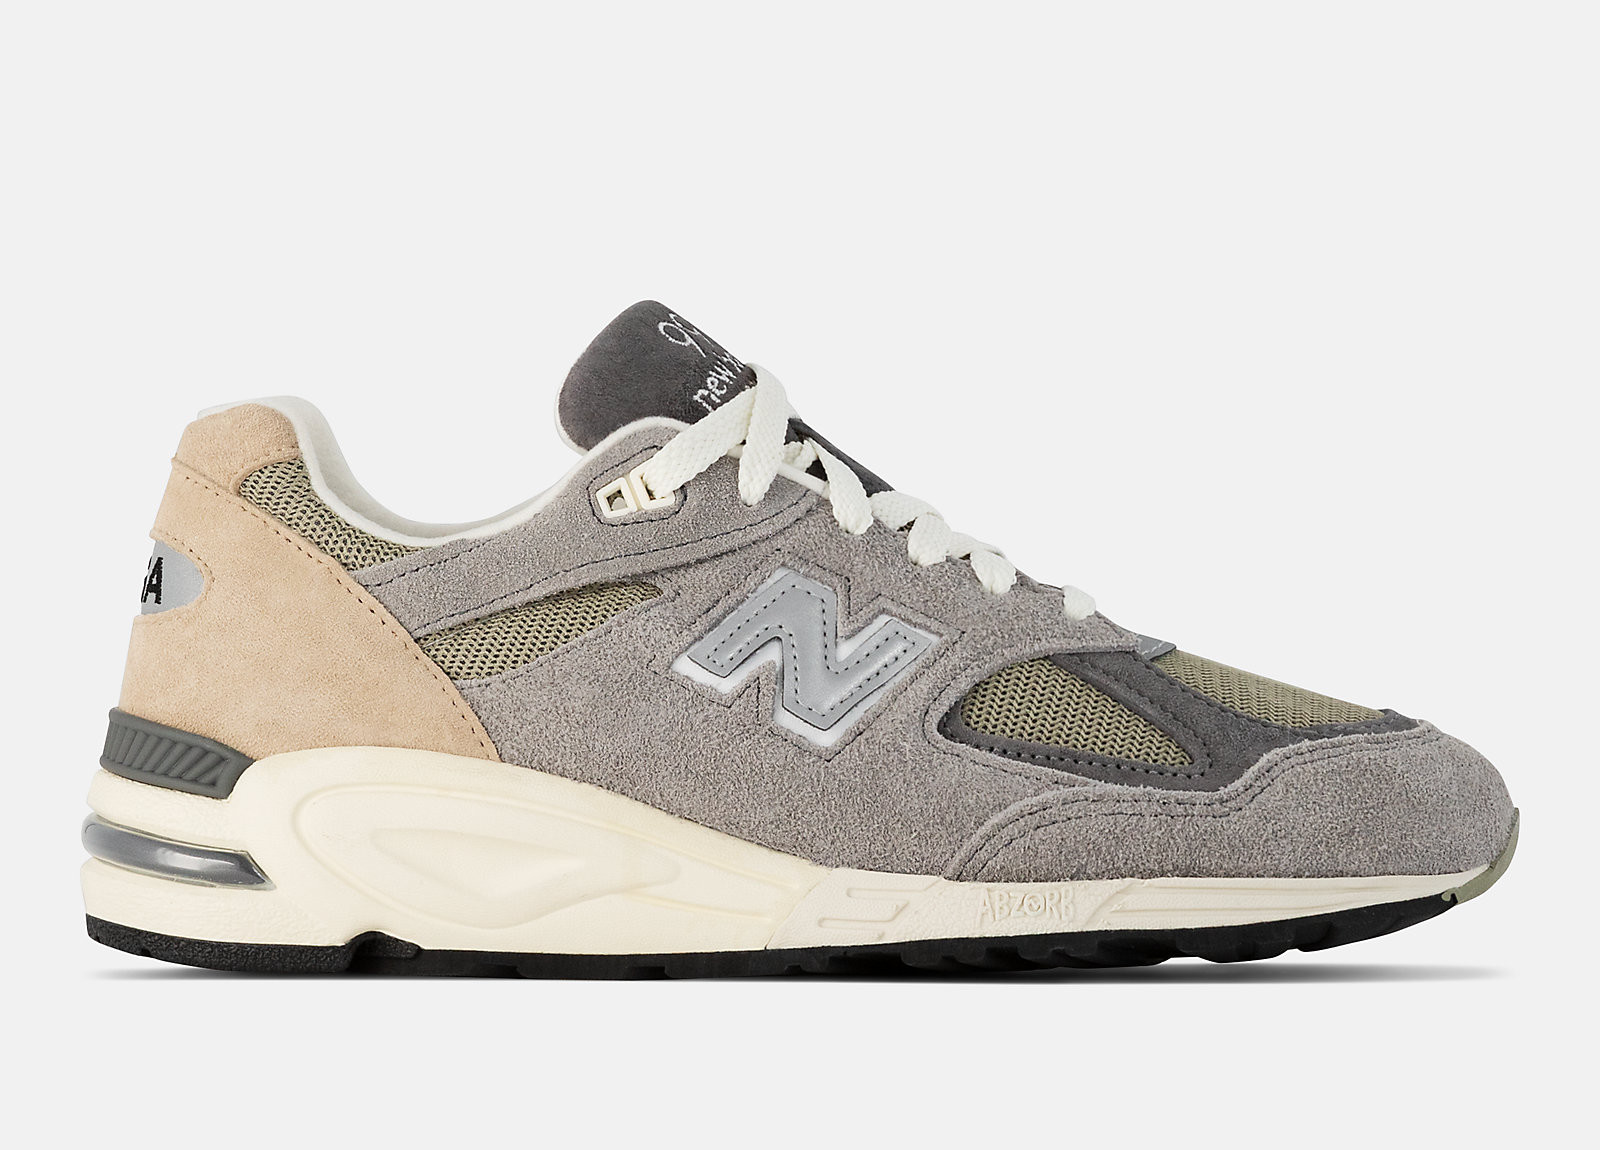 New Balance 990v2
Made In USA
« Marblehead »